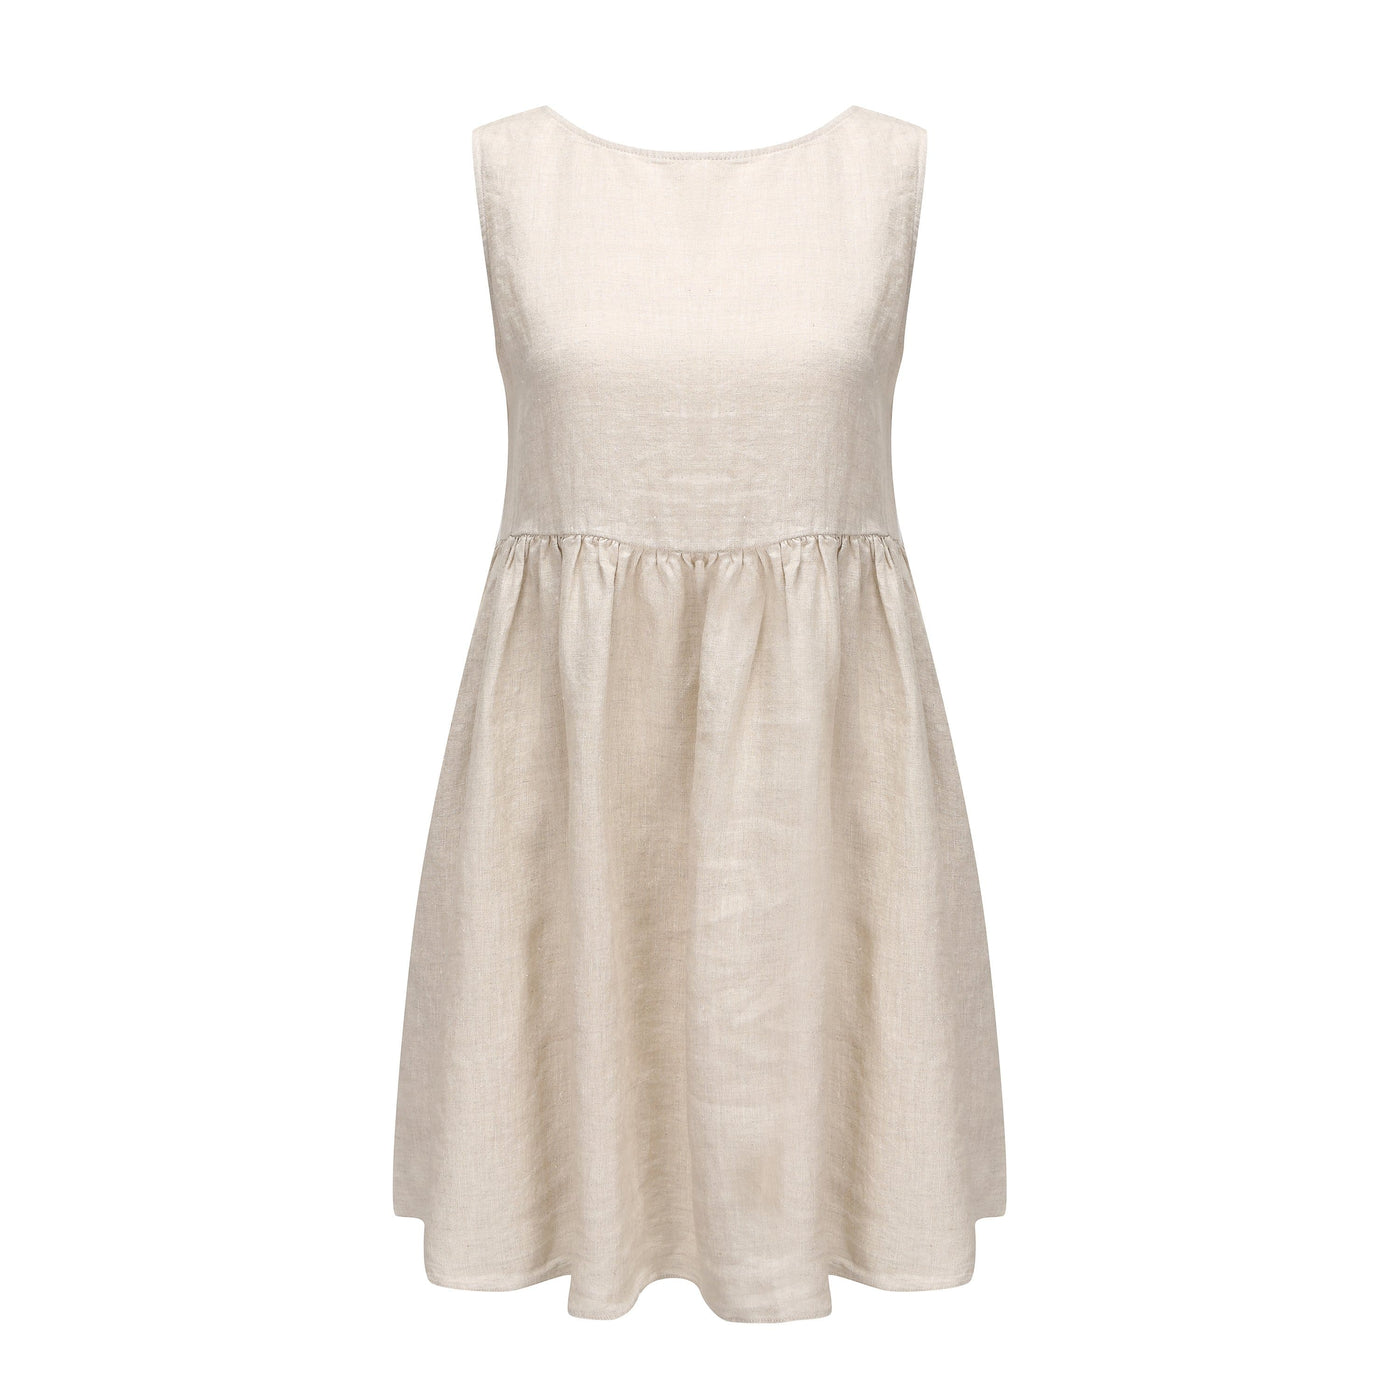 Lilly Pilly Collection 100% organic linen Harper Dress in Oatmeal as 3D image showing front view